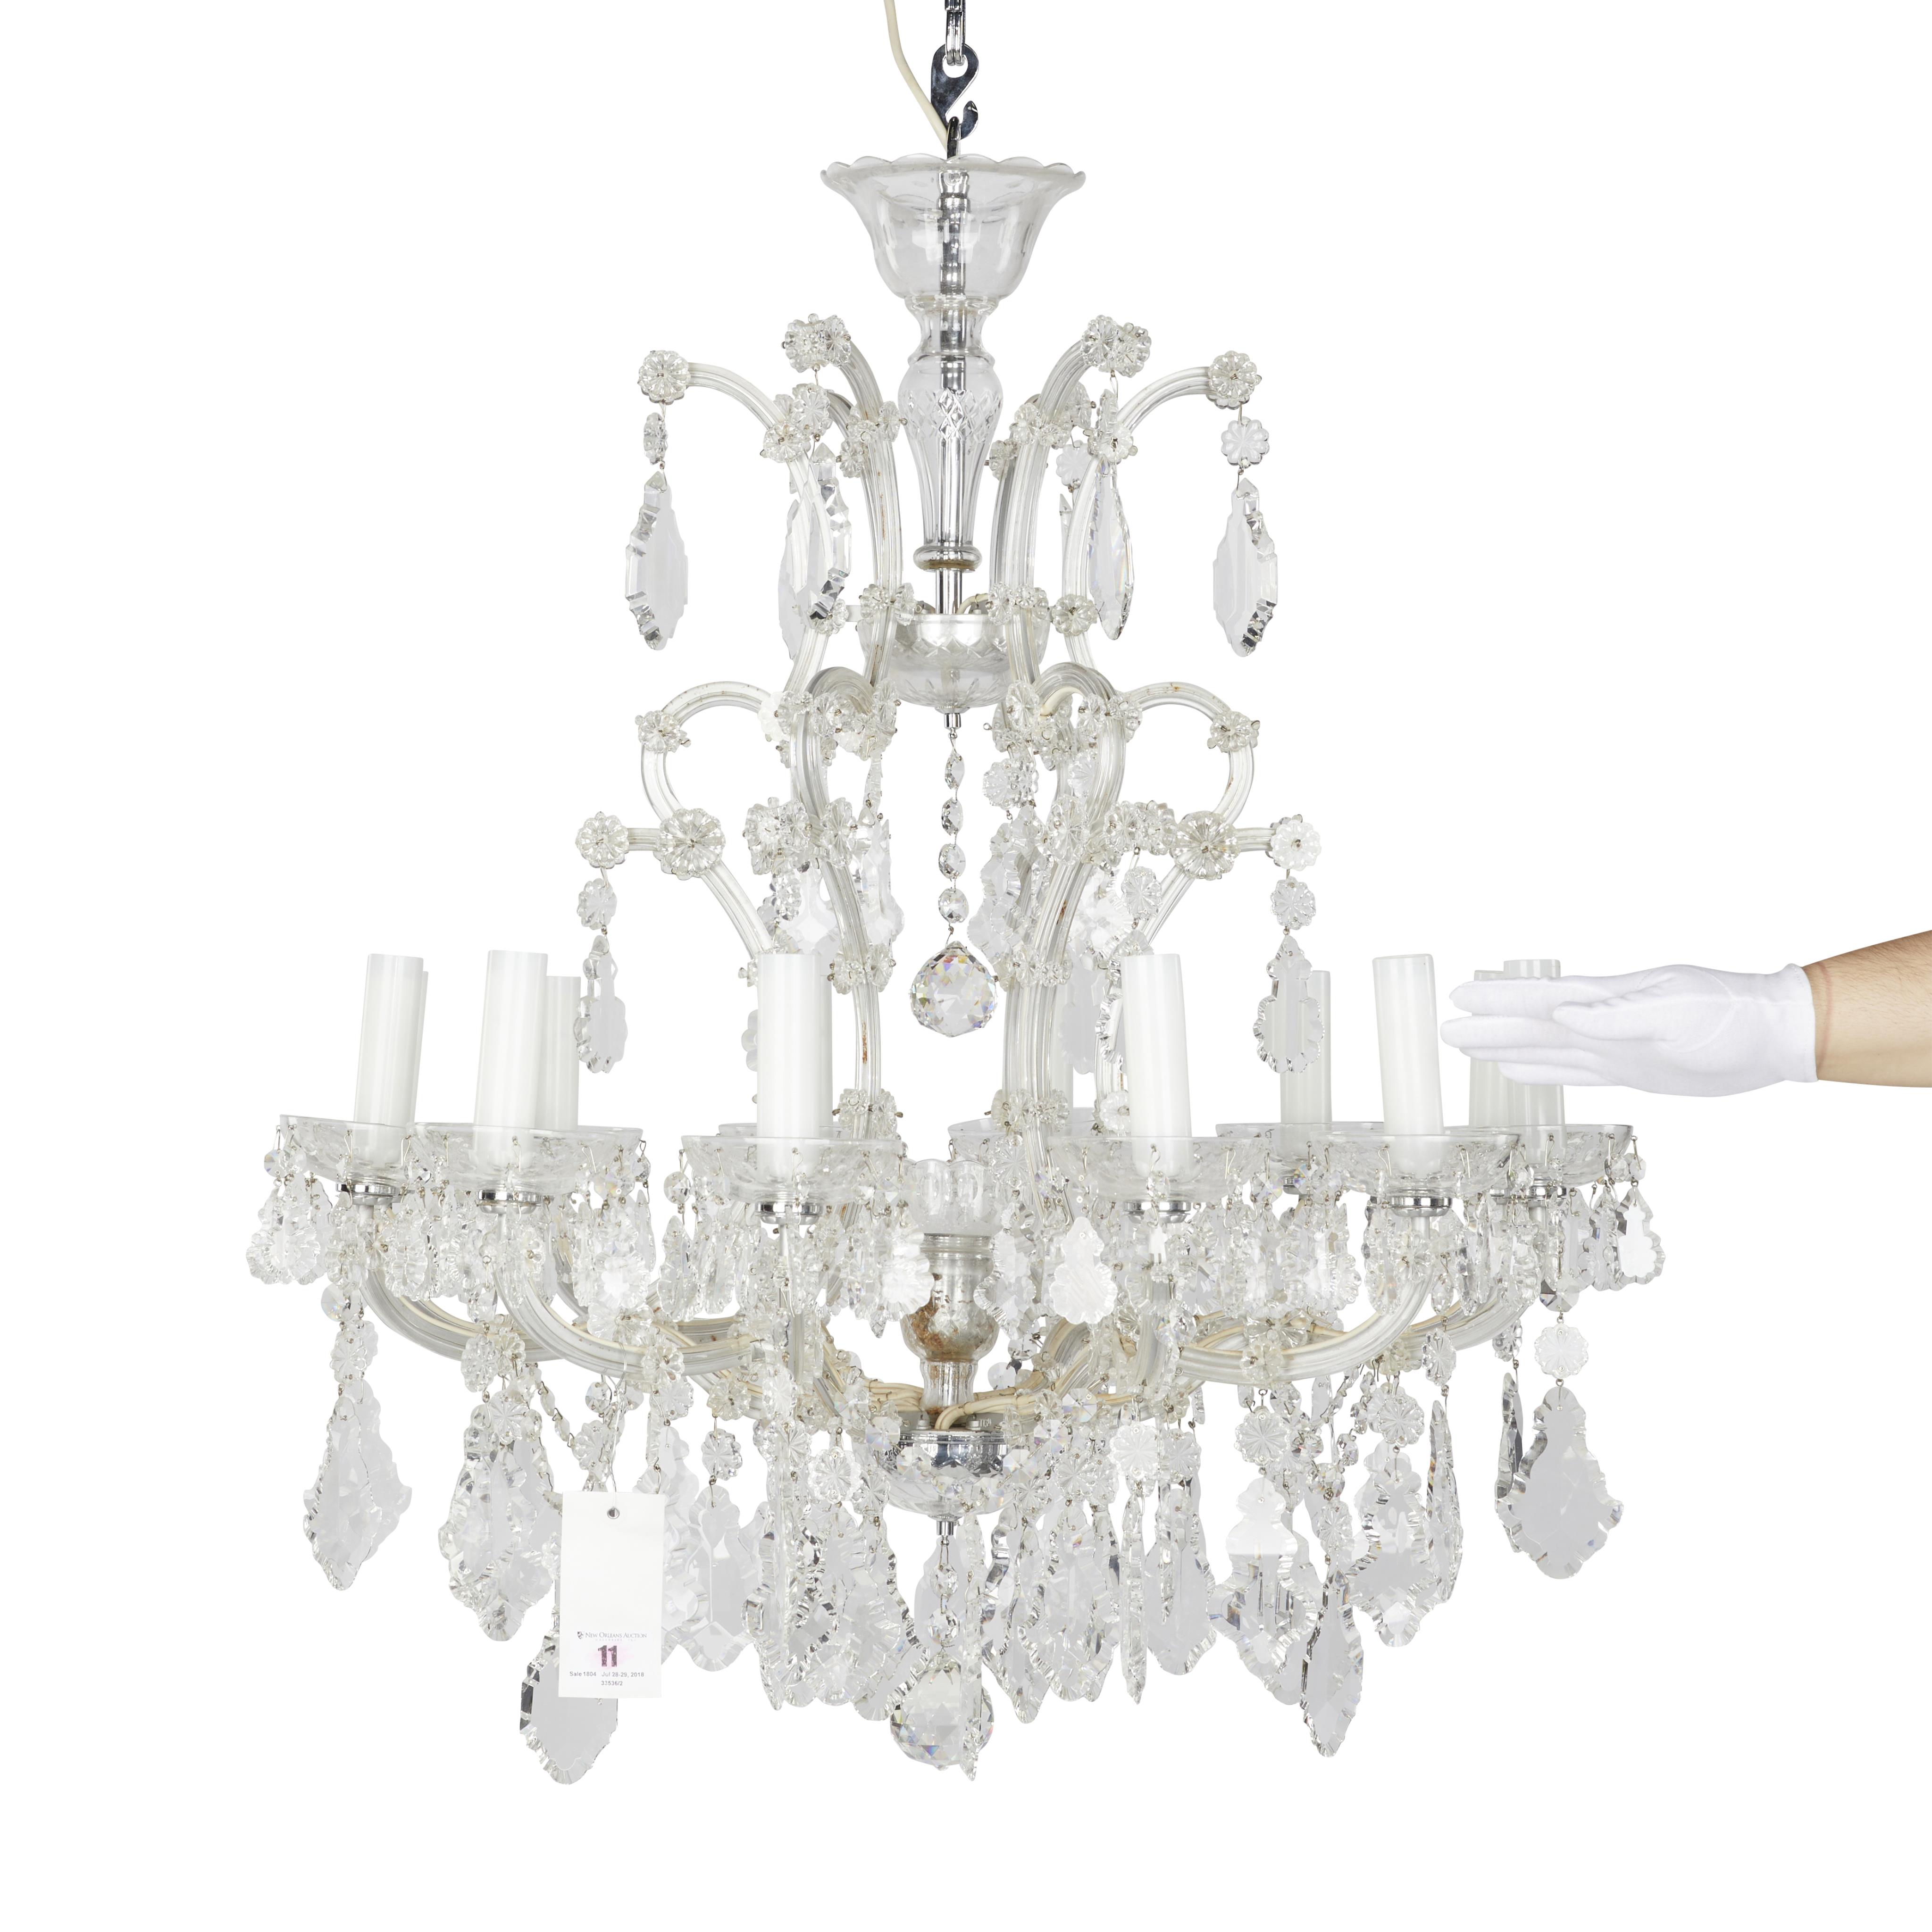 Maria Theresa Style Cut Crystal Chandelier - Image 3 of 17